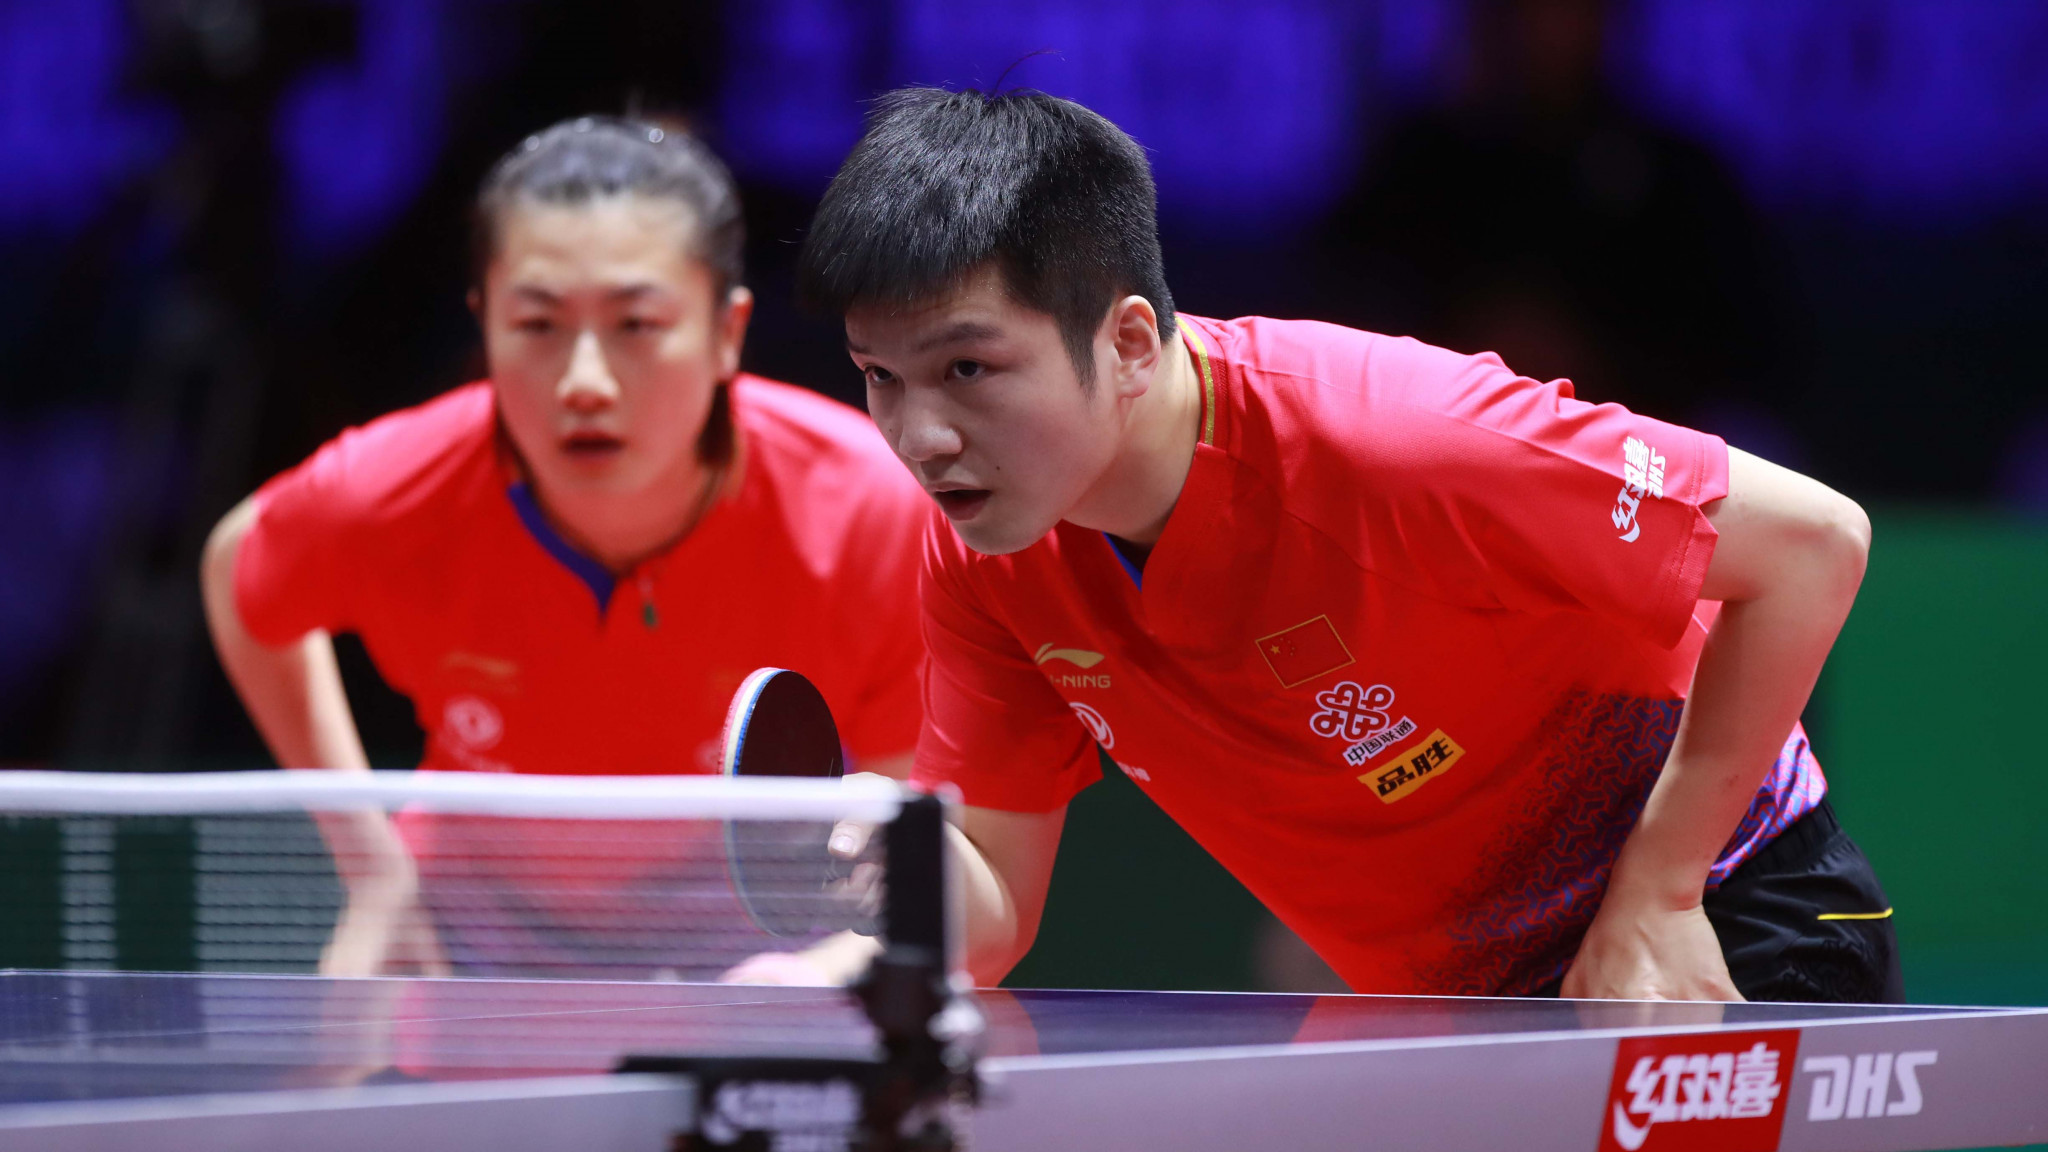 Top singles seeds Fan Zhendong and Ding Ning won their opening mixed doubles contest on the first day of the ITTF World Championships in Budapest ©ITTF